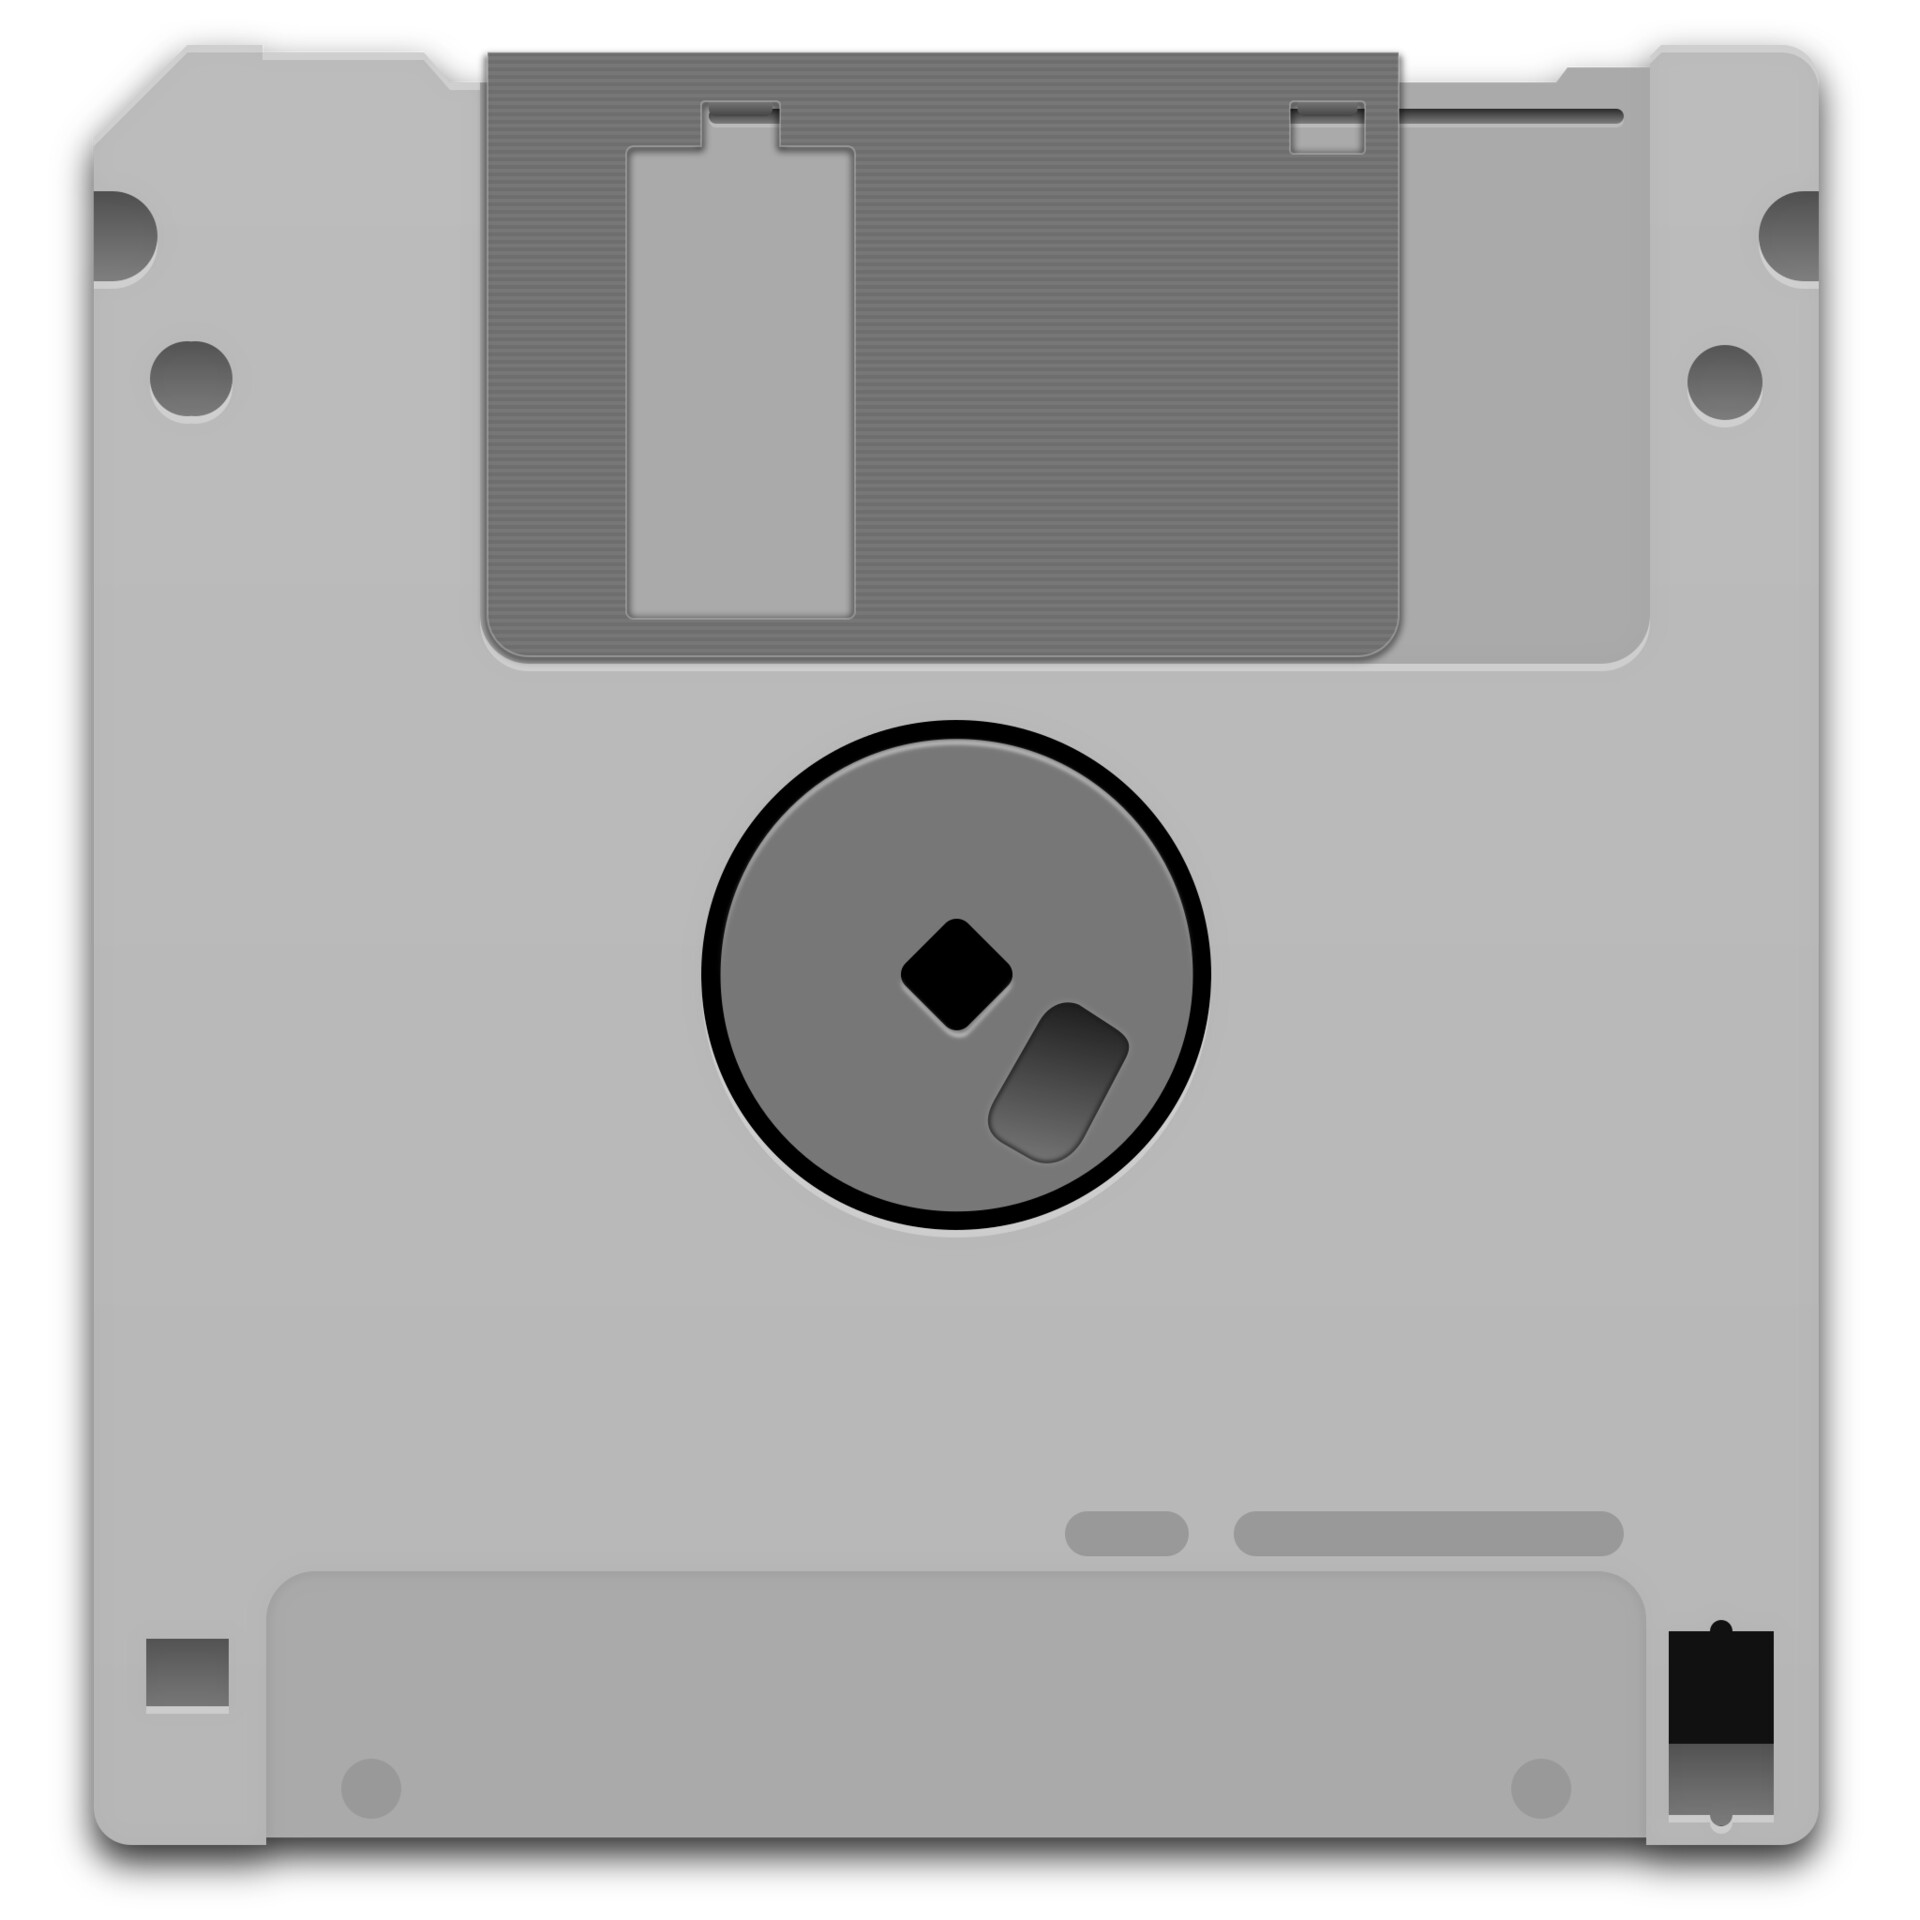 ArtStation - An Ode To The 3 1/4 inch Floppy Diskette